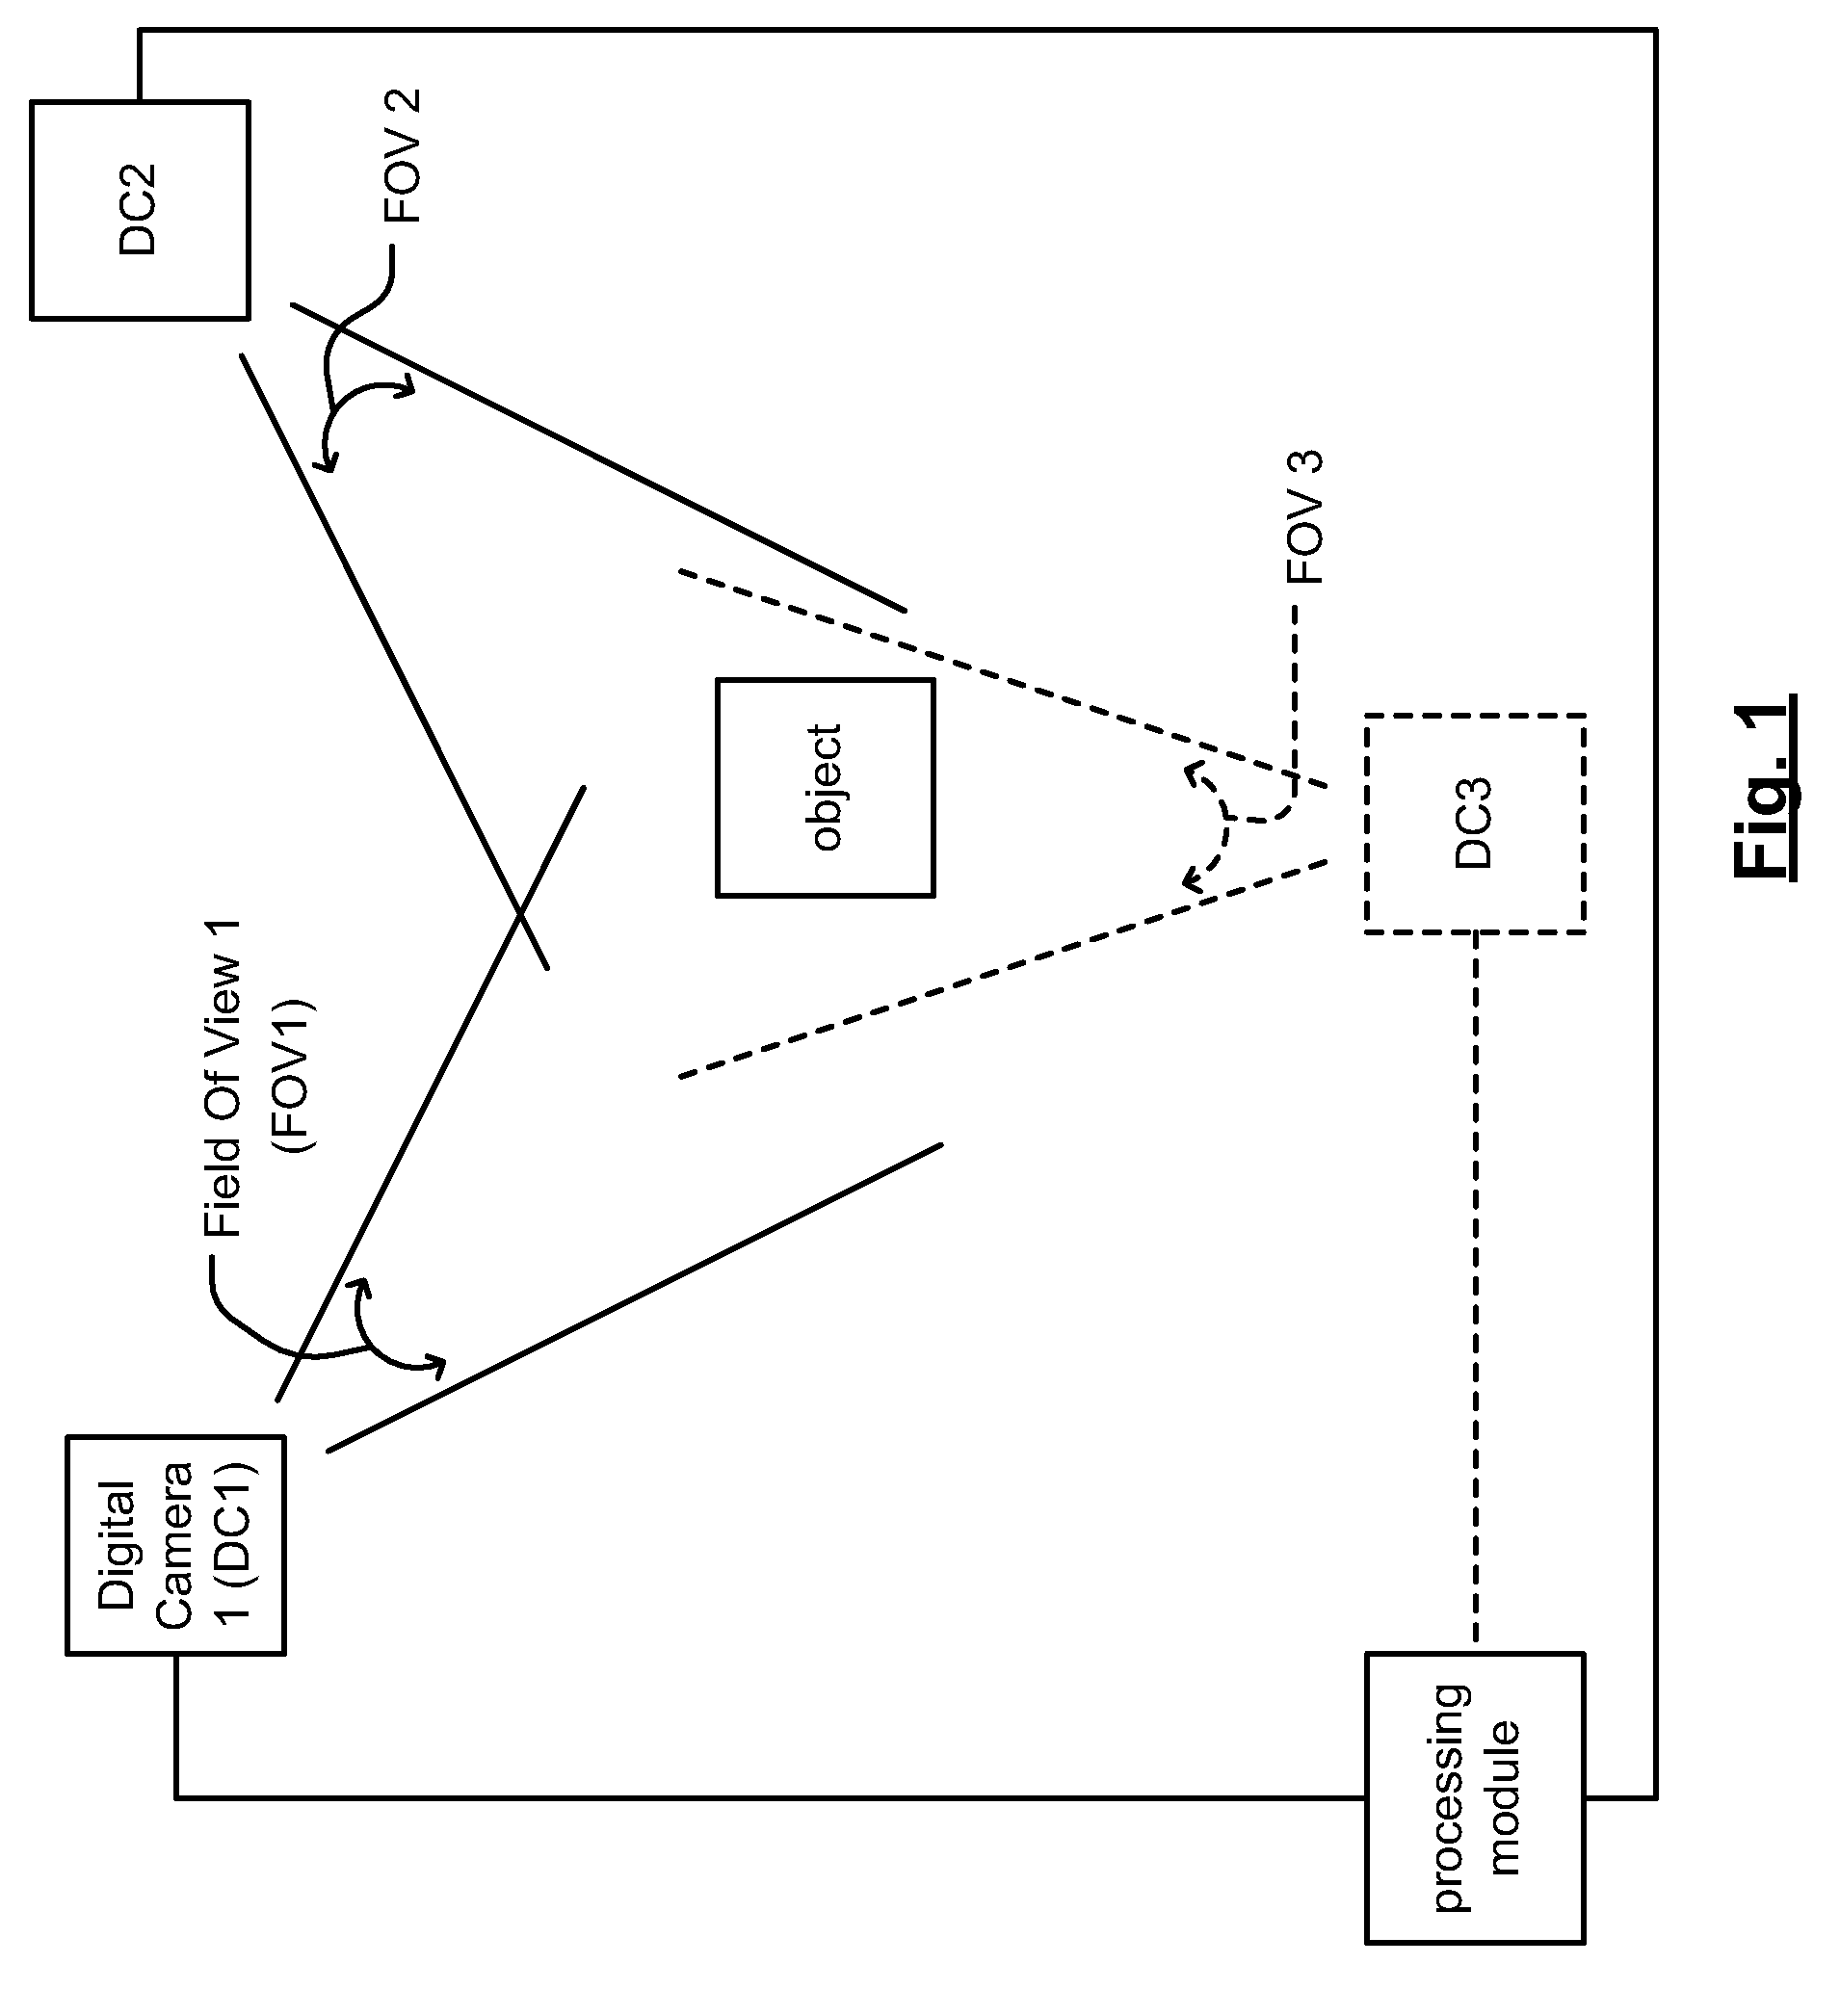 Position detection and/or movement tracking via image capture and processing